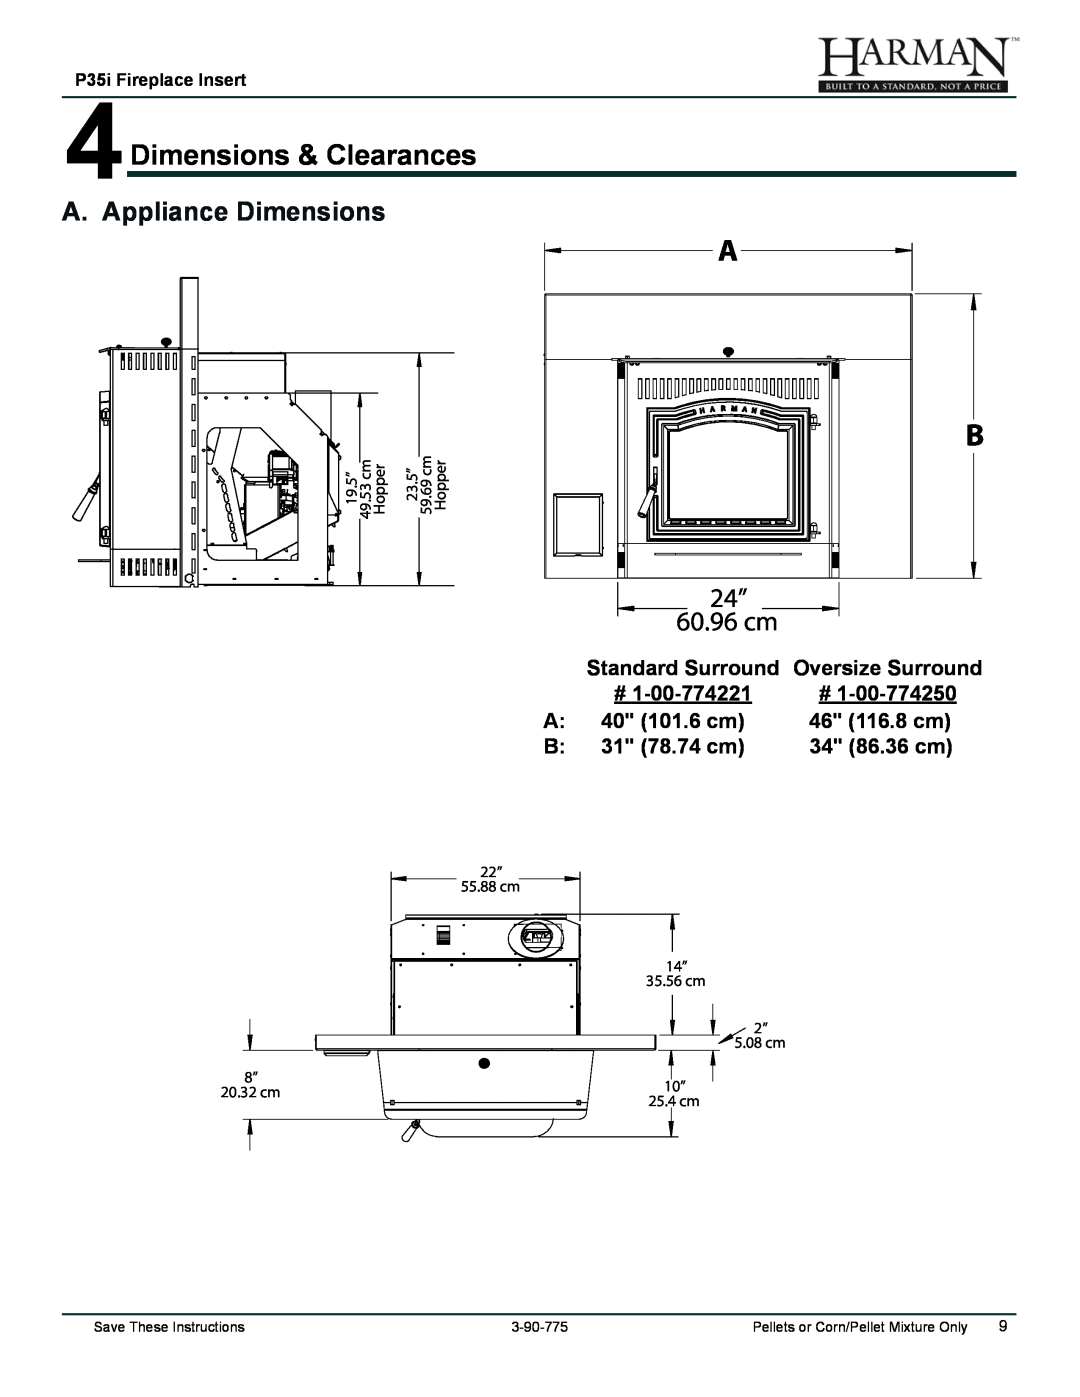 Harman Stove Company P35I owner manual 4Dimensions & Clearances, A. Appliance Dimensions, 60.96 cm, P35i Fireplace Insert 